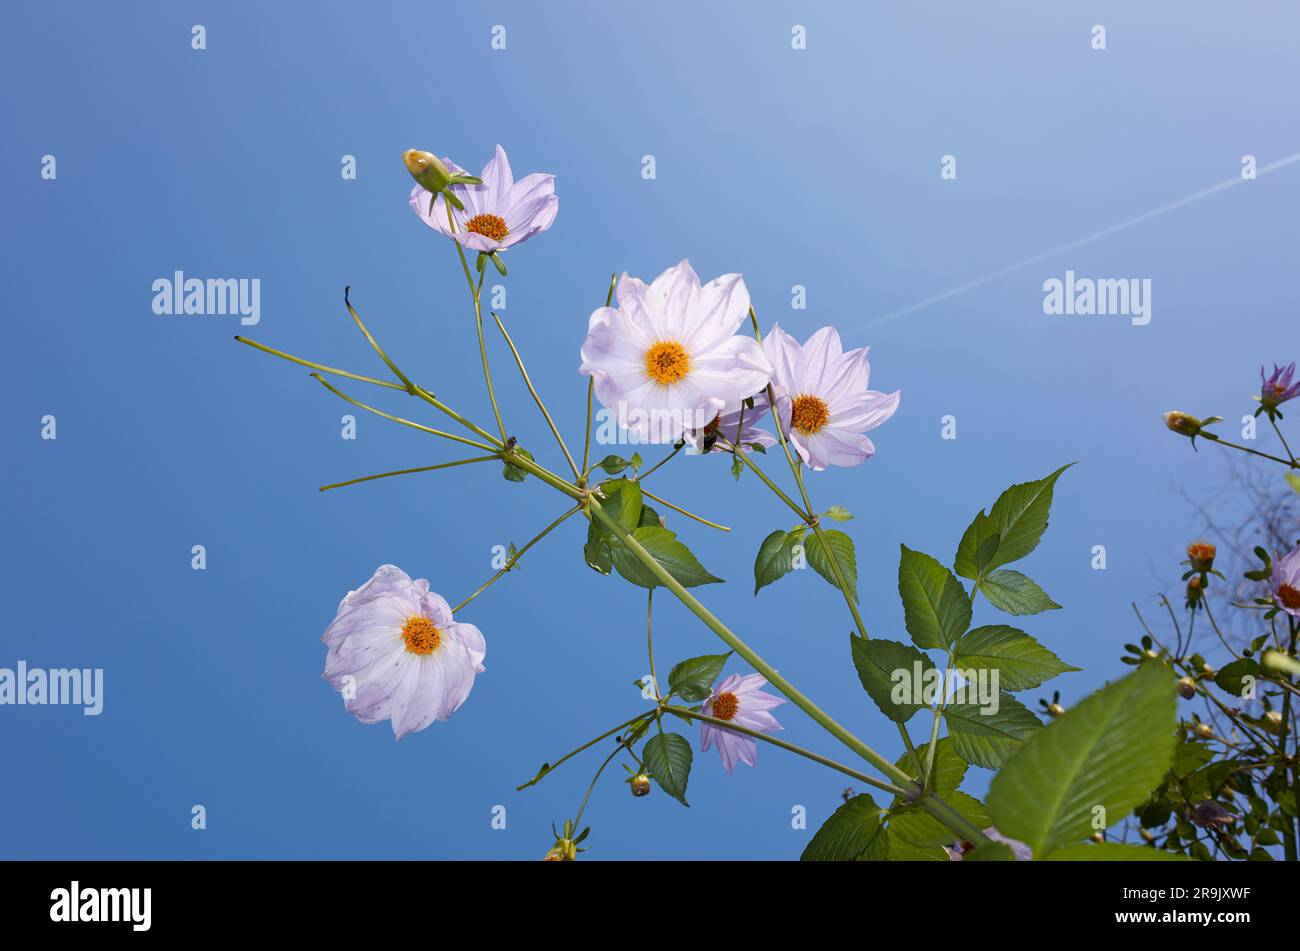 Dahlia imperialis leaves and flowers Stock Photo